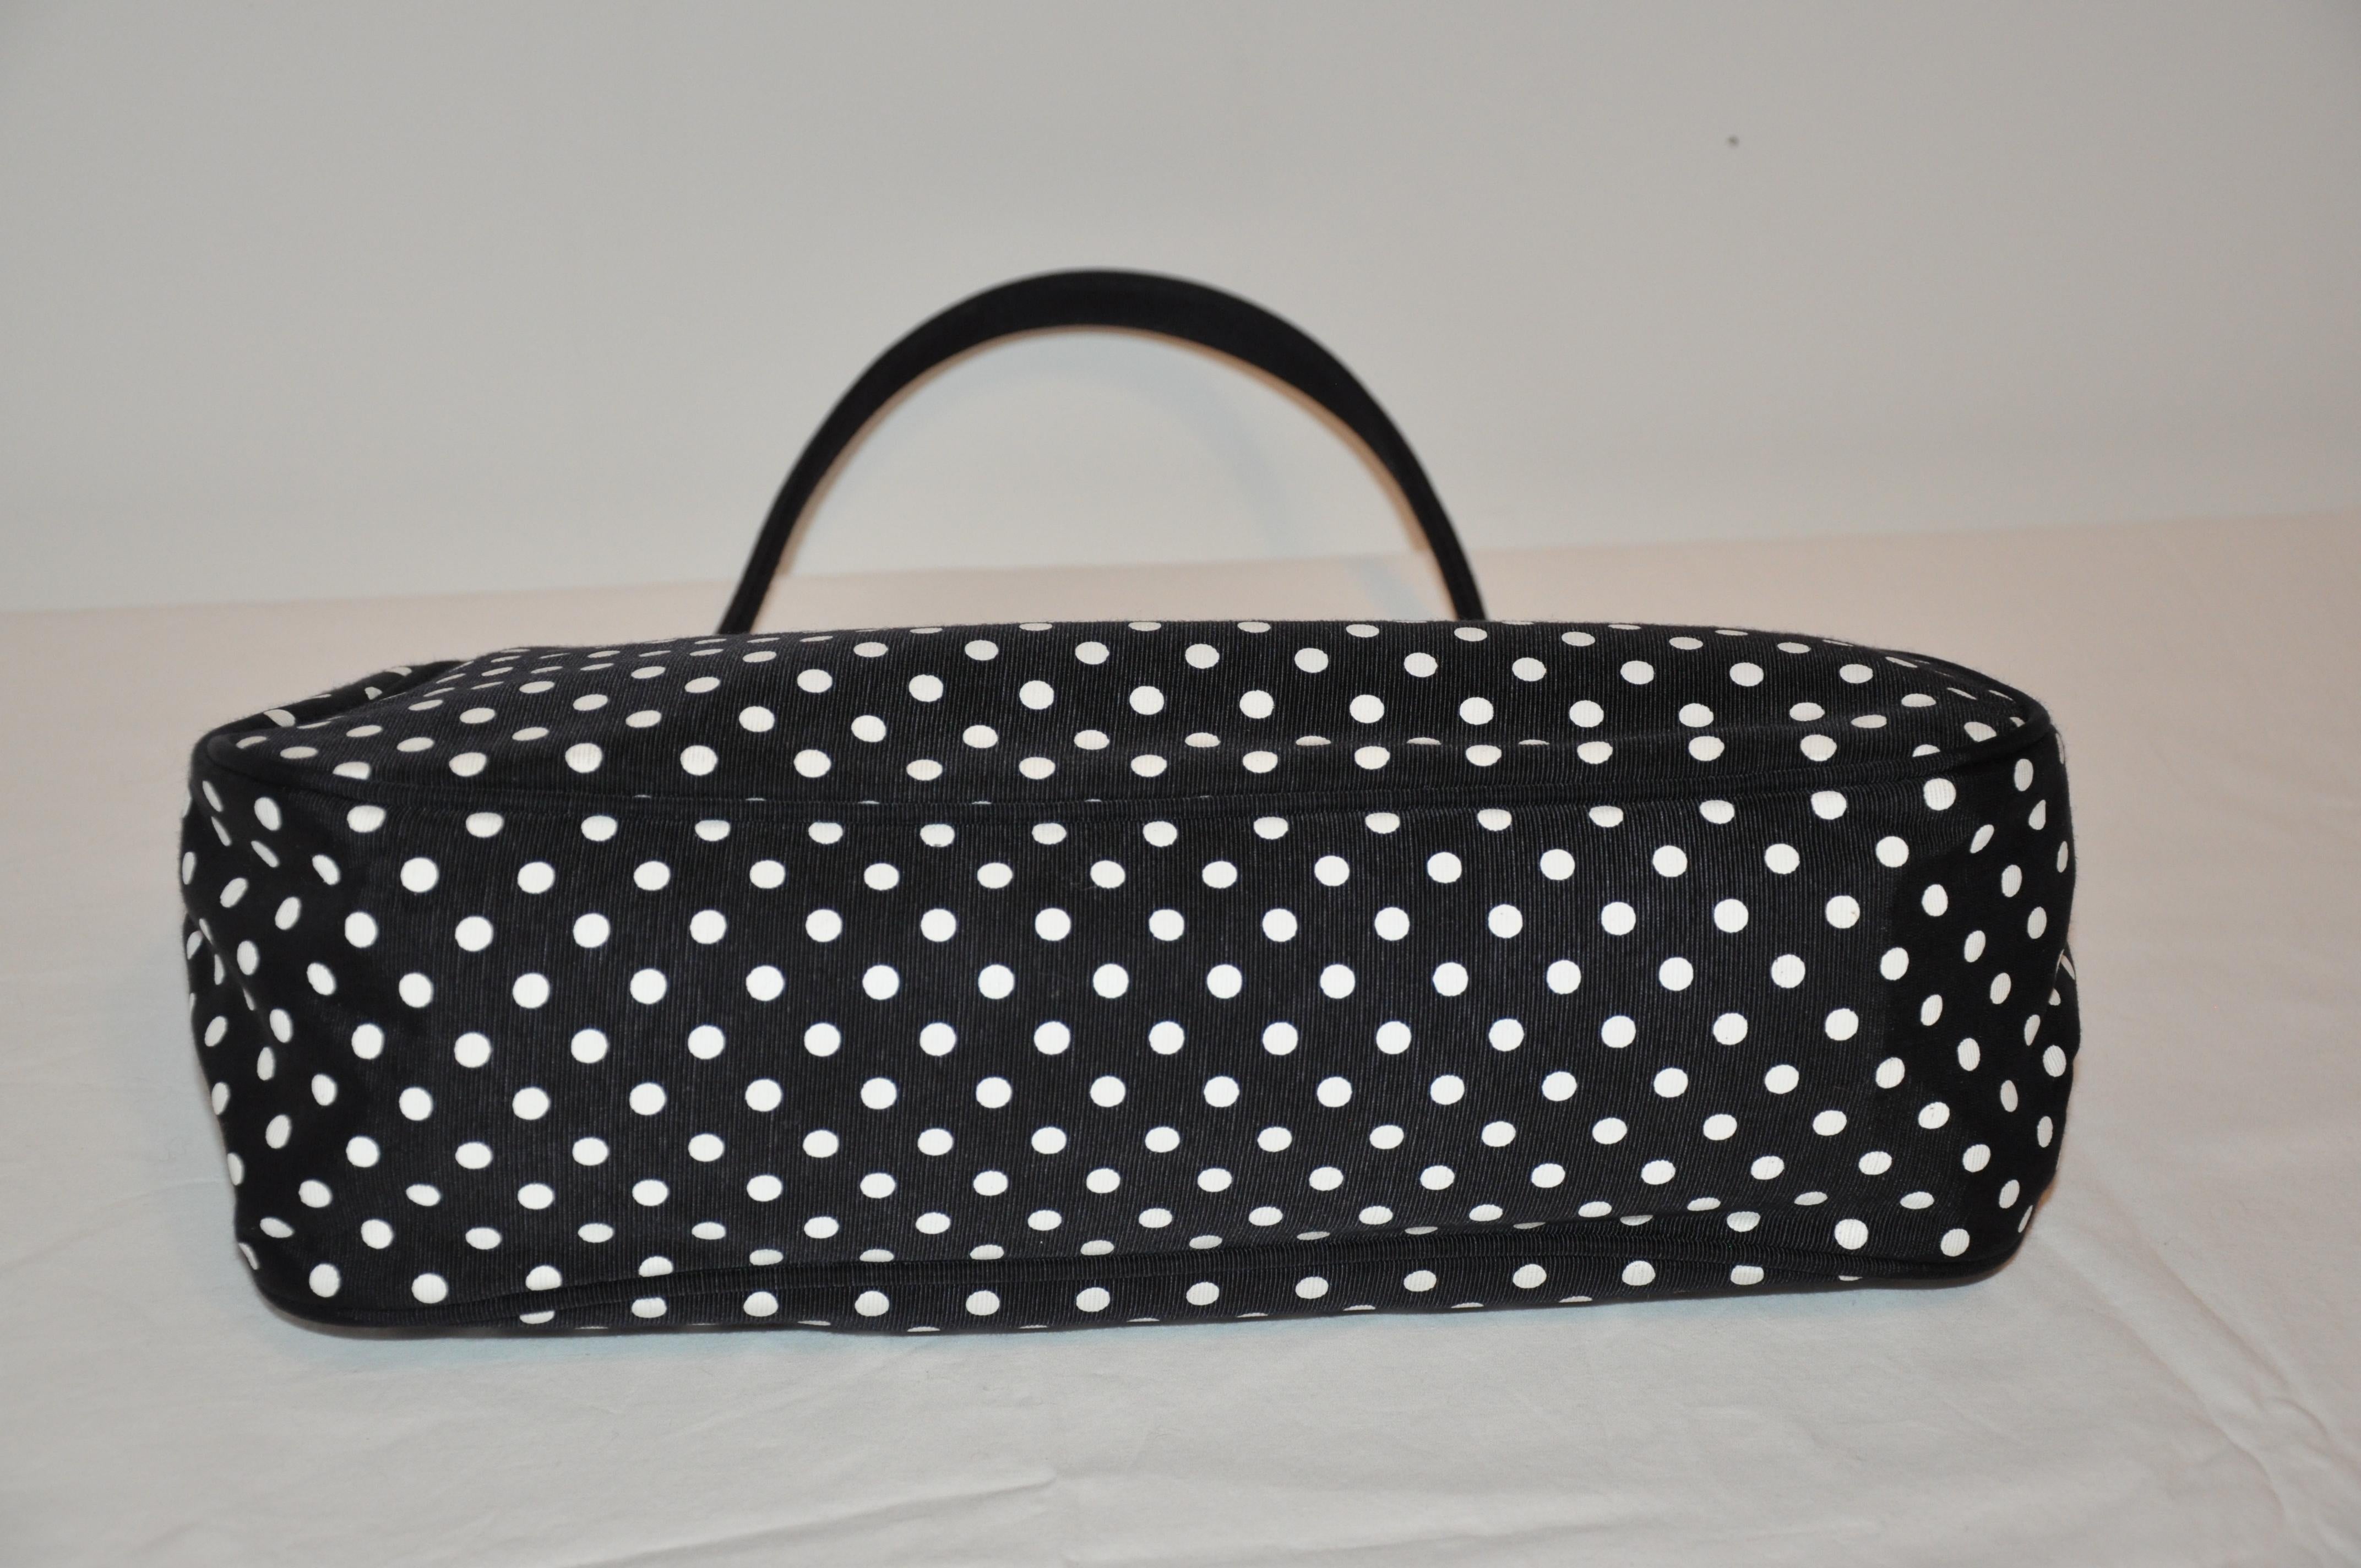 Moschino Black with White Polka Dot and Gilded Gold Hardware Accent Handbag For Sale 3